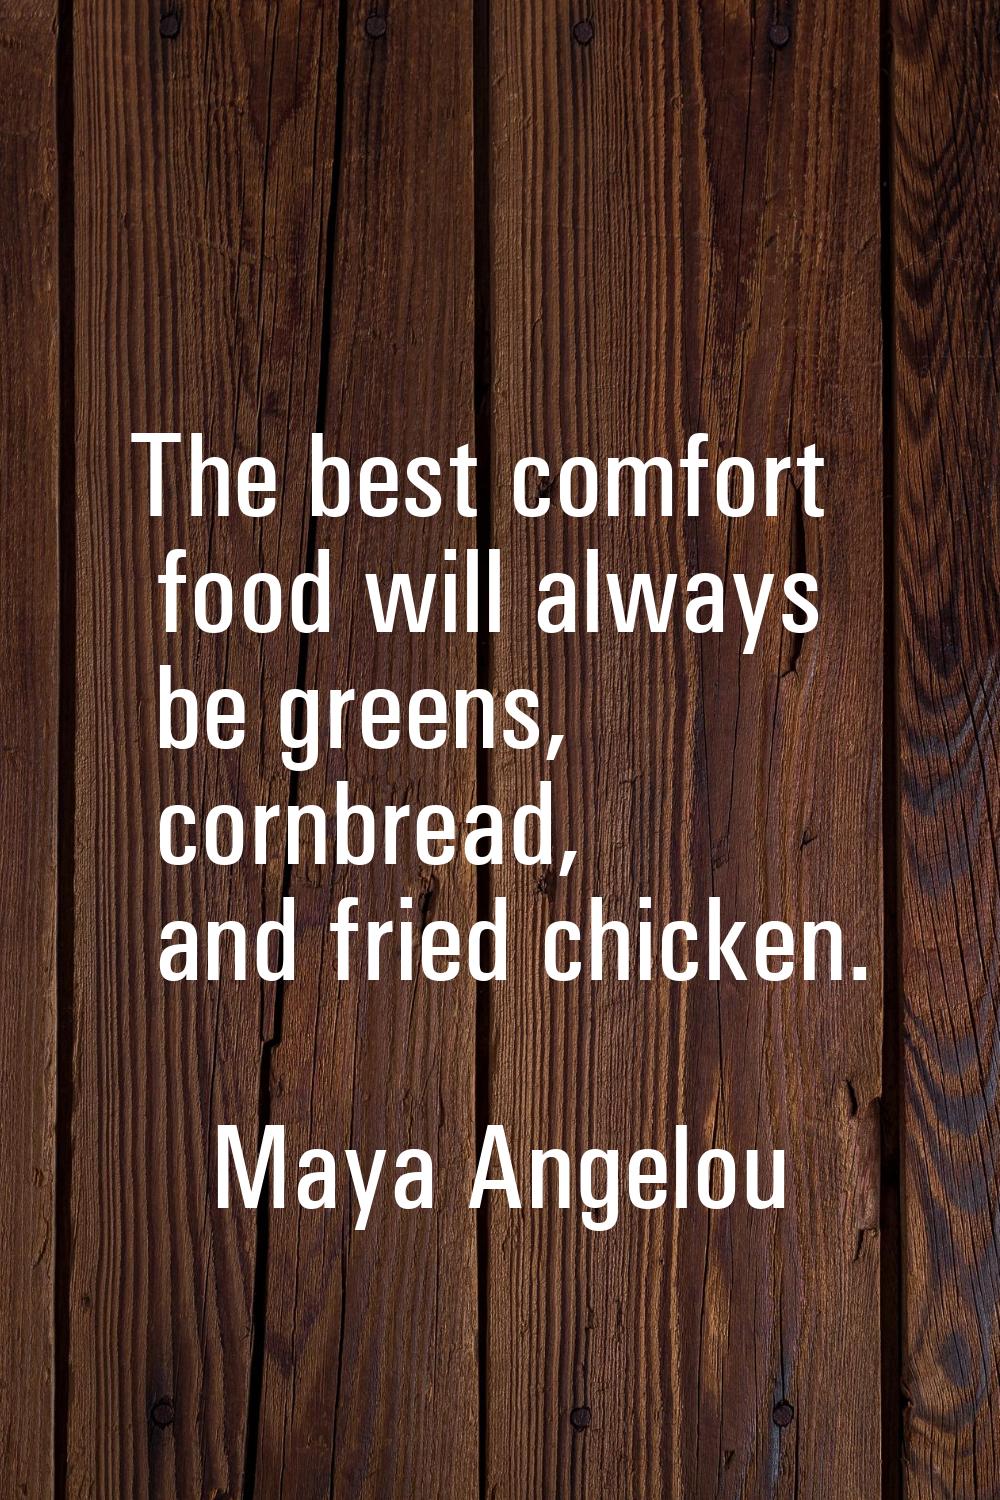 The best comfort food will always be greens, cornbread, and fried chicken.